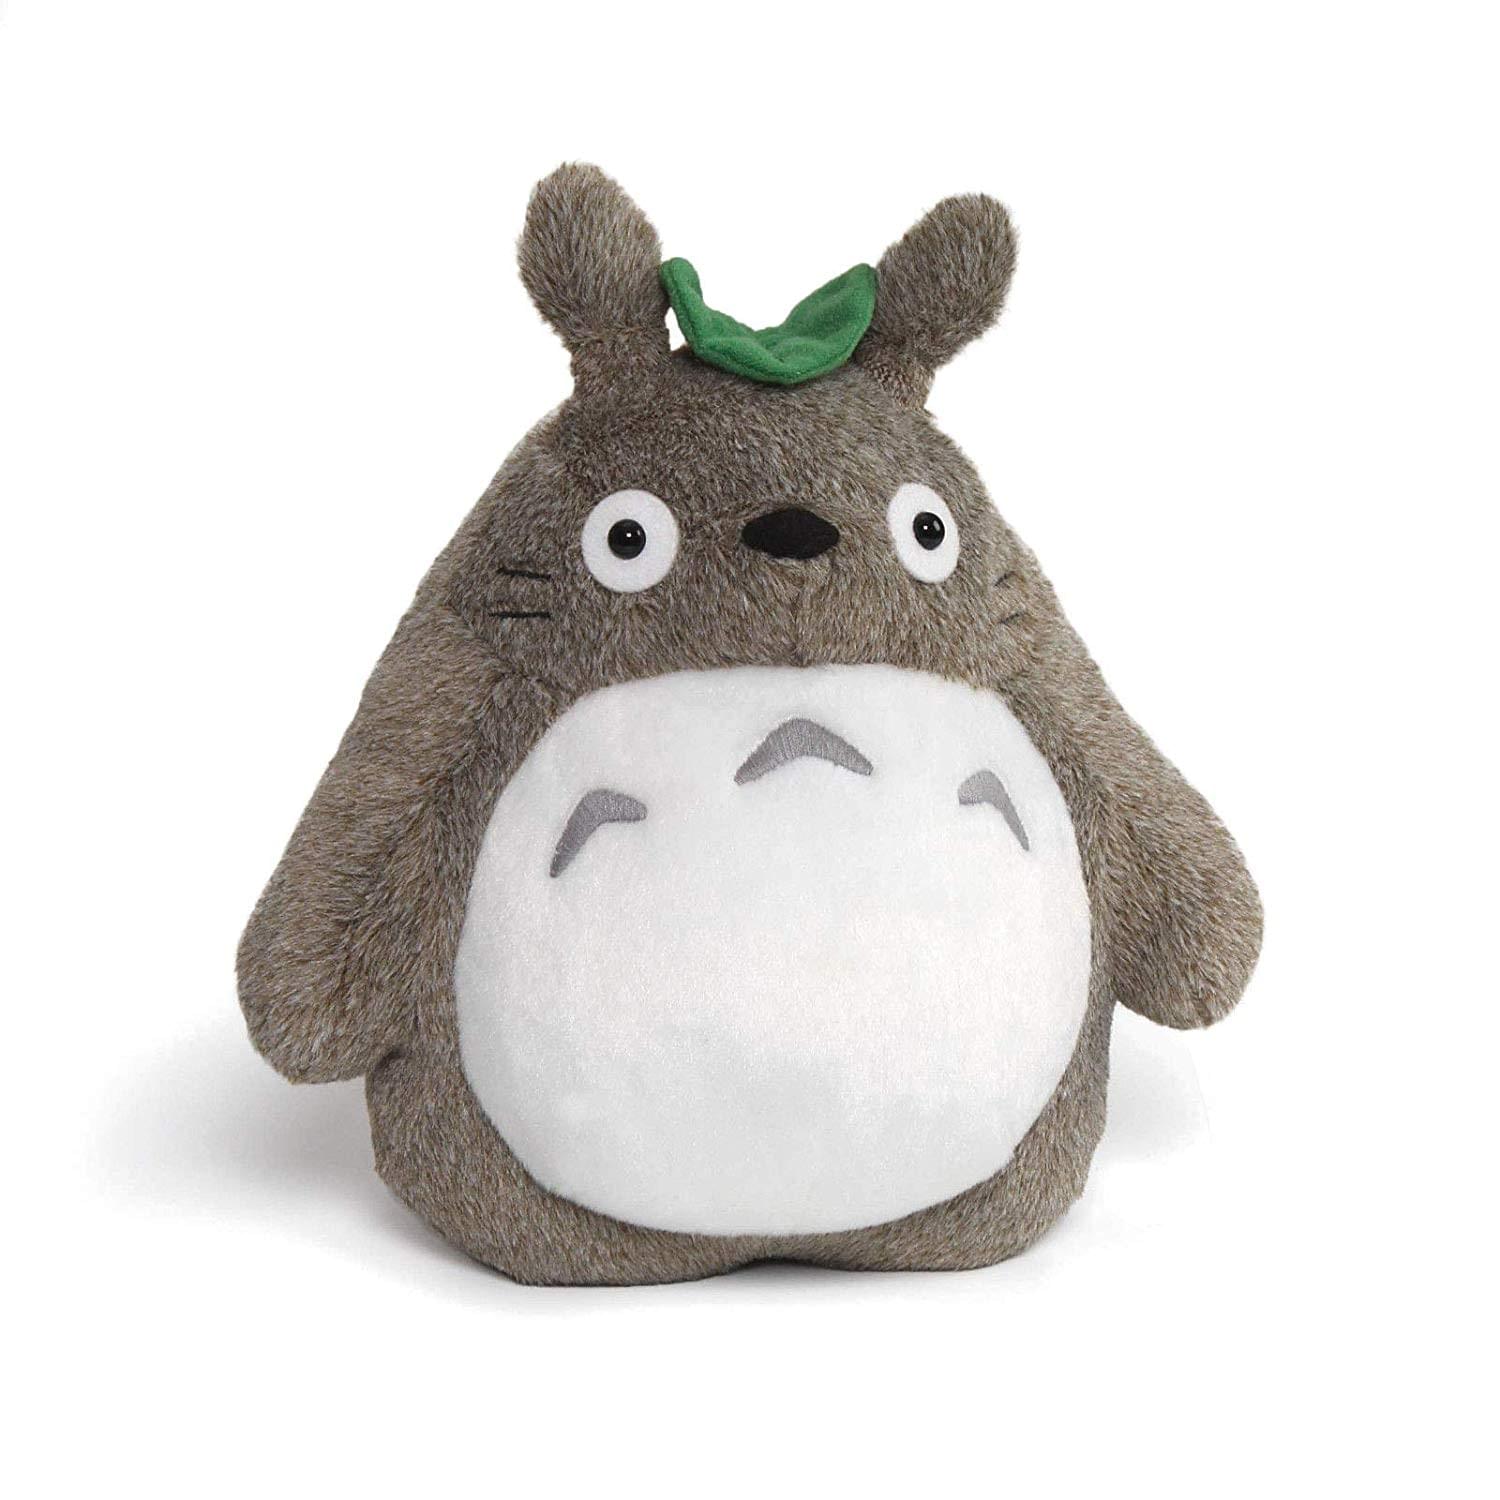 Totoro with Leaf 9 Inch Deluxe Stuffed Animal Plush